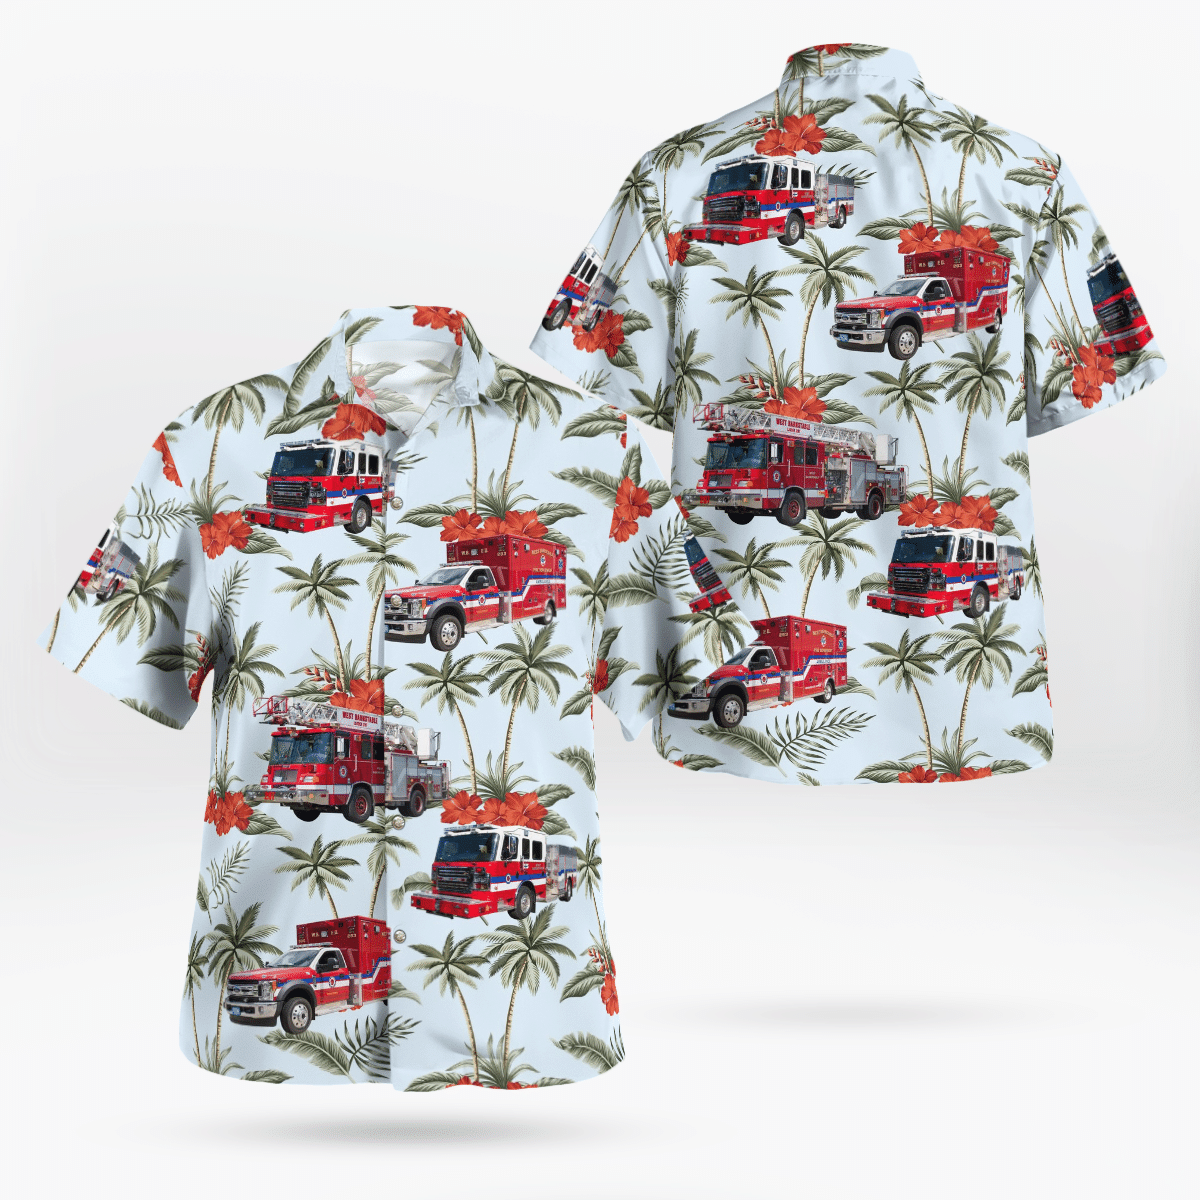 If you are in need of a new summertime look, pick up this Hawaiian shirt 56